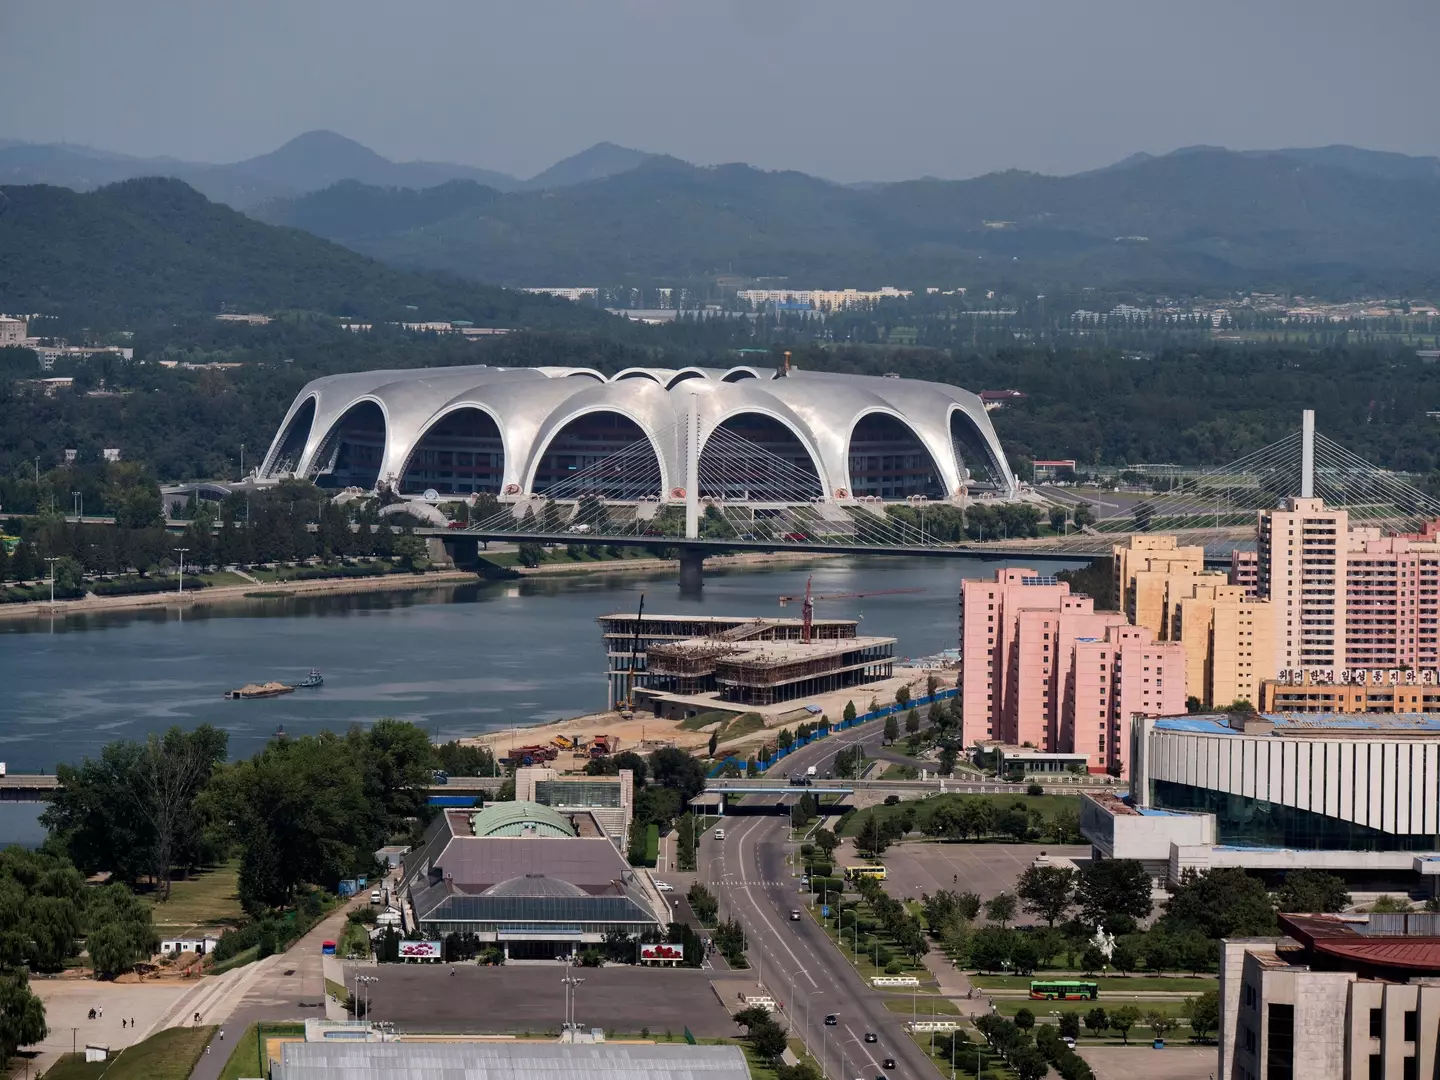 The stadium in North Korea is the biggest to have staged football matches. Image: Alamy